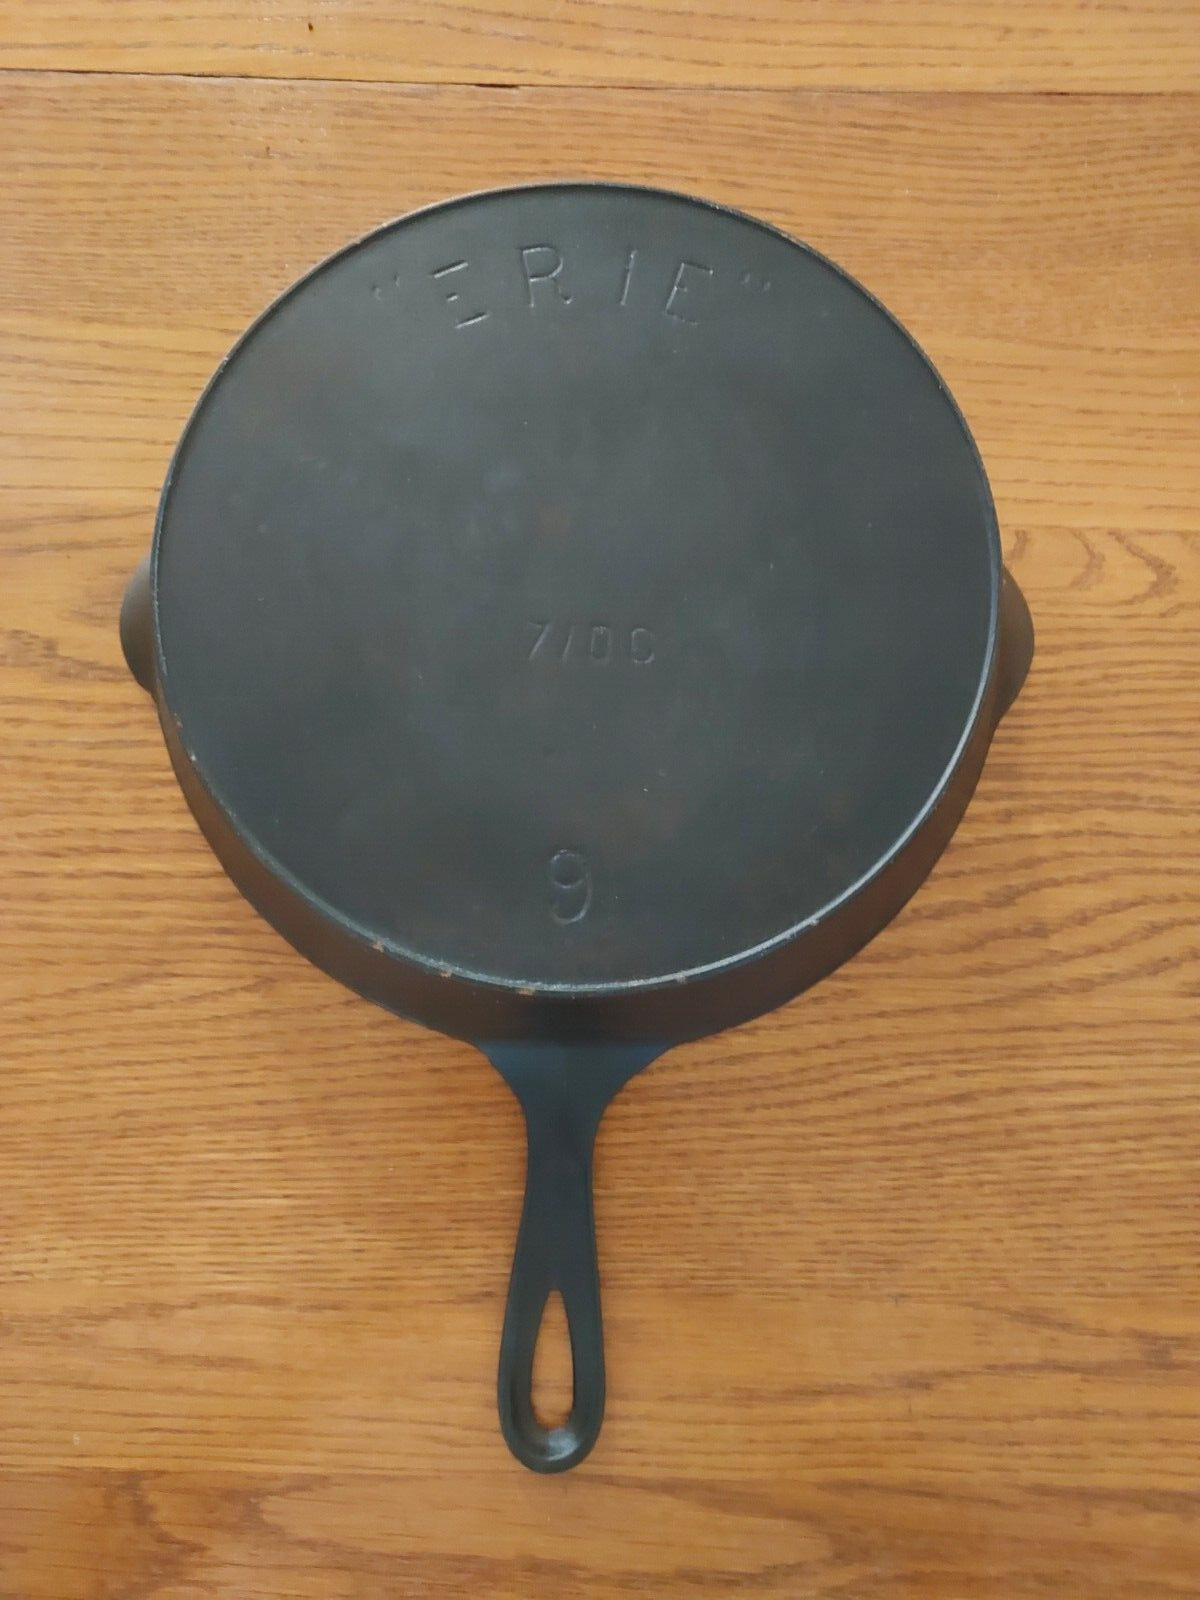 ERIE No. 9 3rd series (1890s-1905) cast iron skillet (cracked)